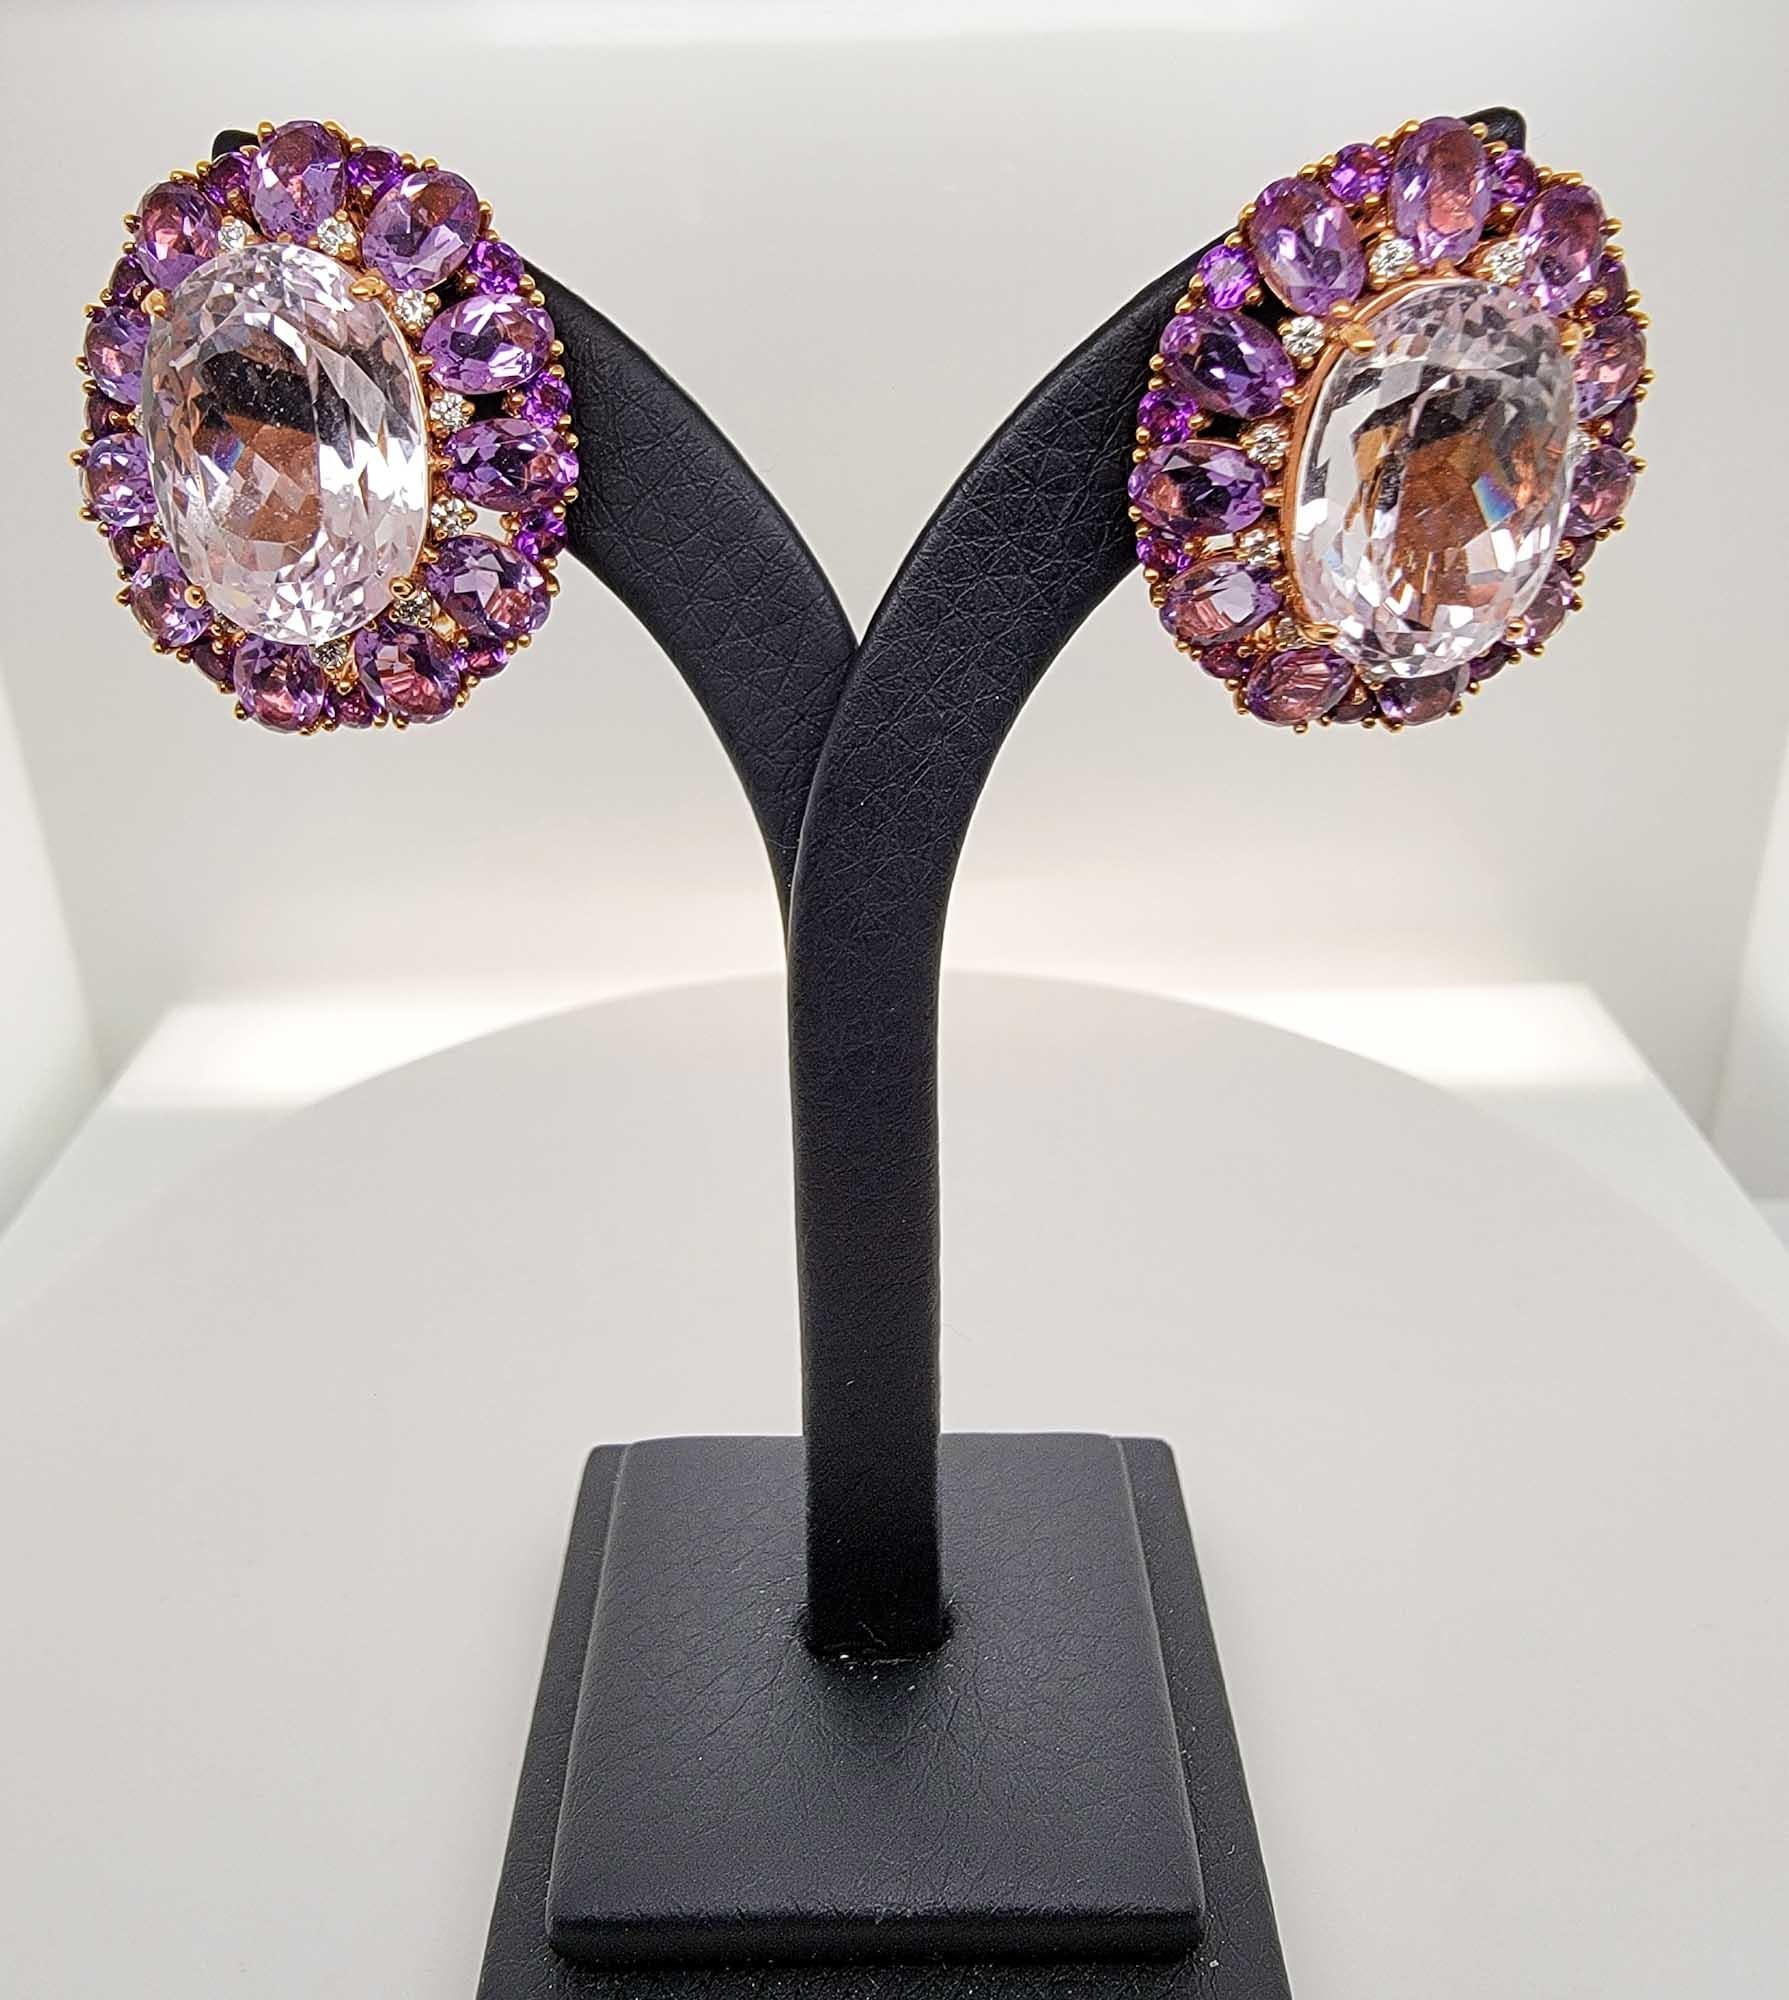 Gorgeous pair of 18 karat yellow gold earrings with kunzite weighing 27.32 carats and diamonds weighing 0.37 carats and amethyst weighing 10.06 carats.

Sophia D by Joseph Dardashti LTD has been known worldwide for 35 years and are inspired by